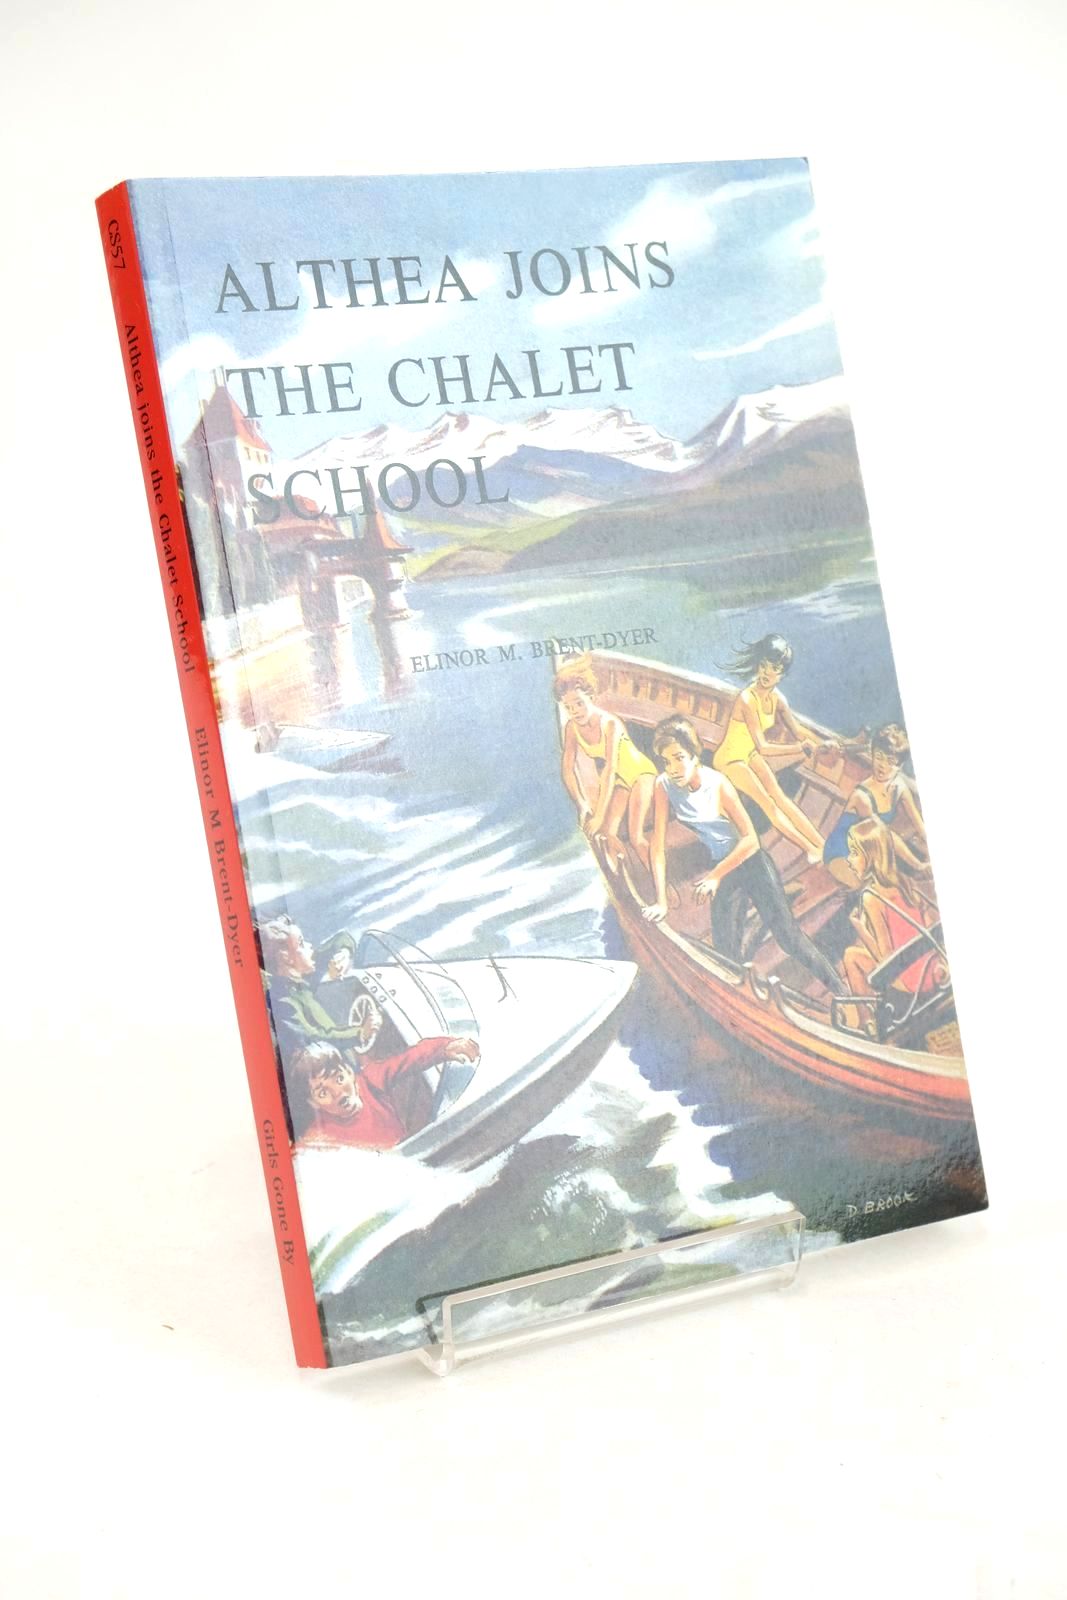 Photo of ALTHEA JOINS THE CHALET SCHOOL- Stock Number: 1325488